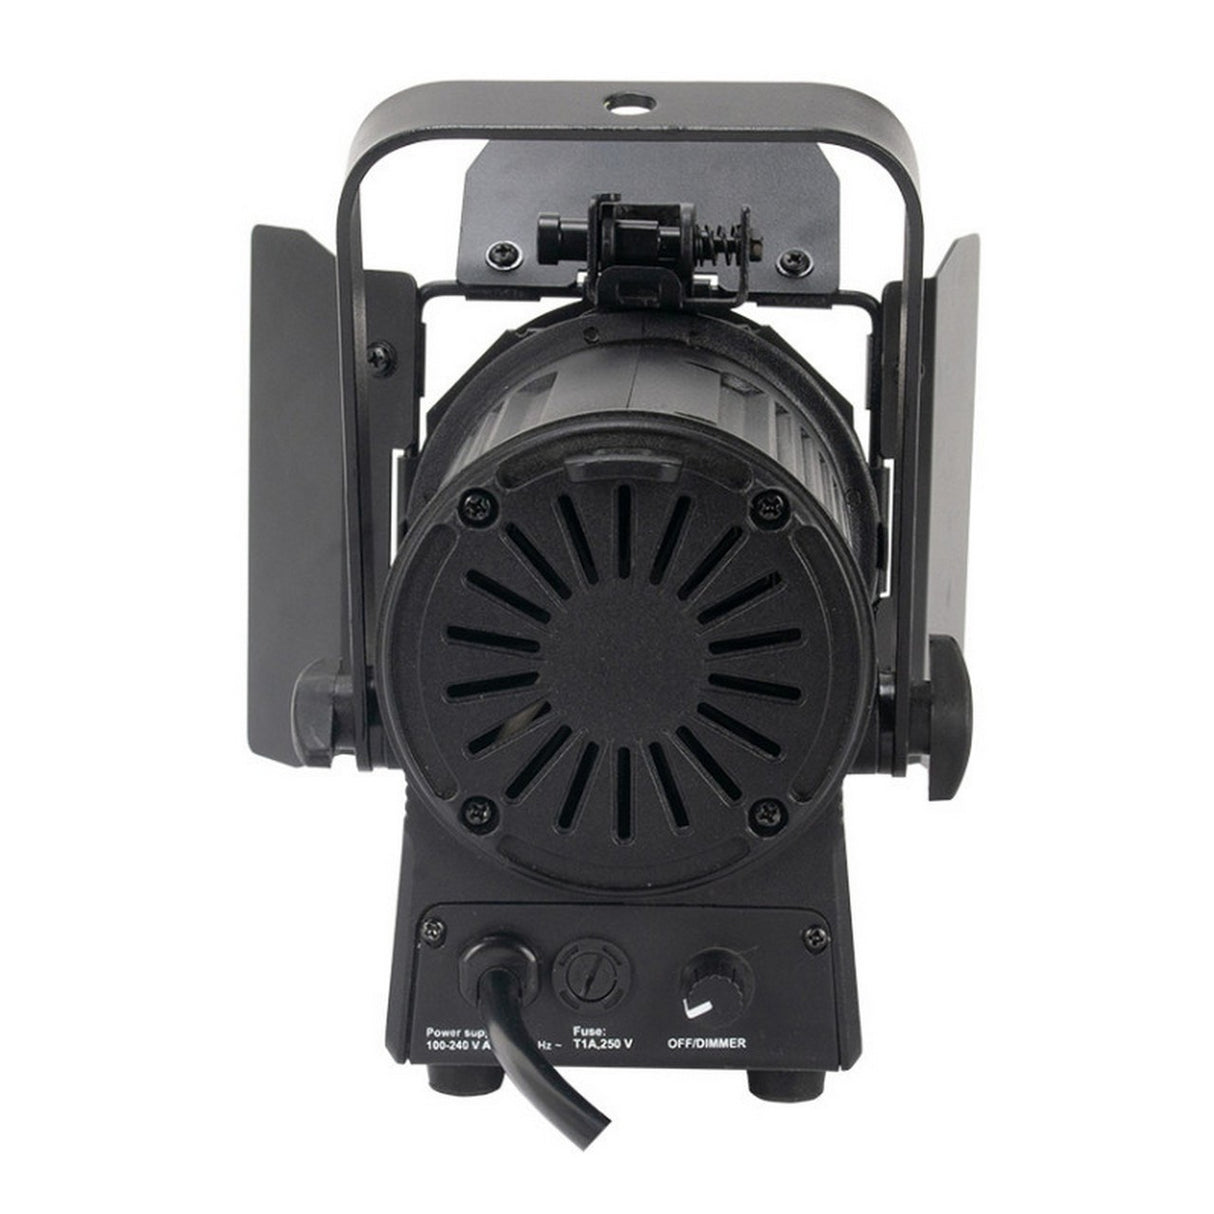 ADJ ENCORE FR20 DTW | Compact 2 Inch Fresnel Fixture LED Light with Dim to Warm